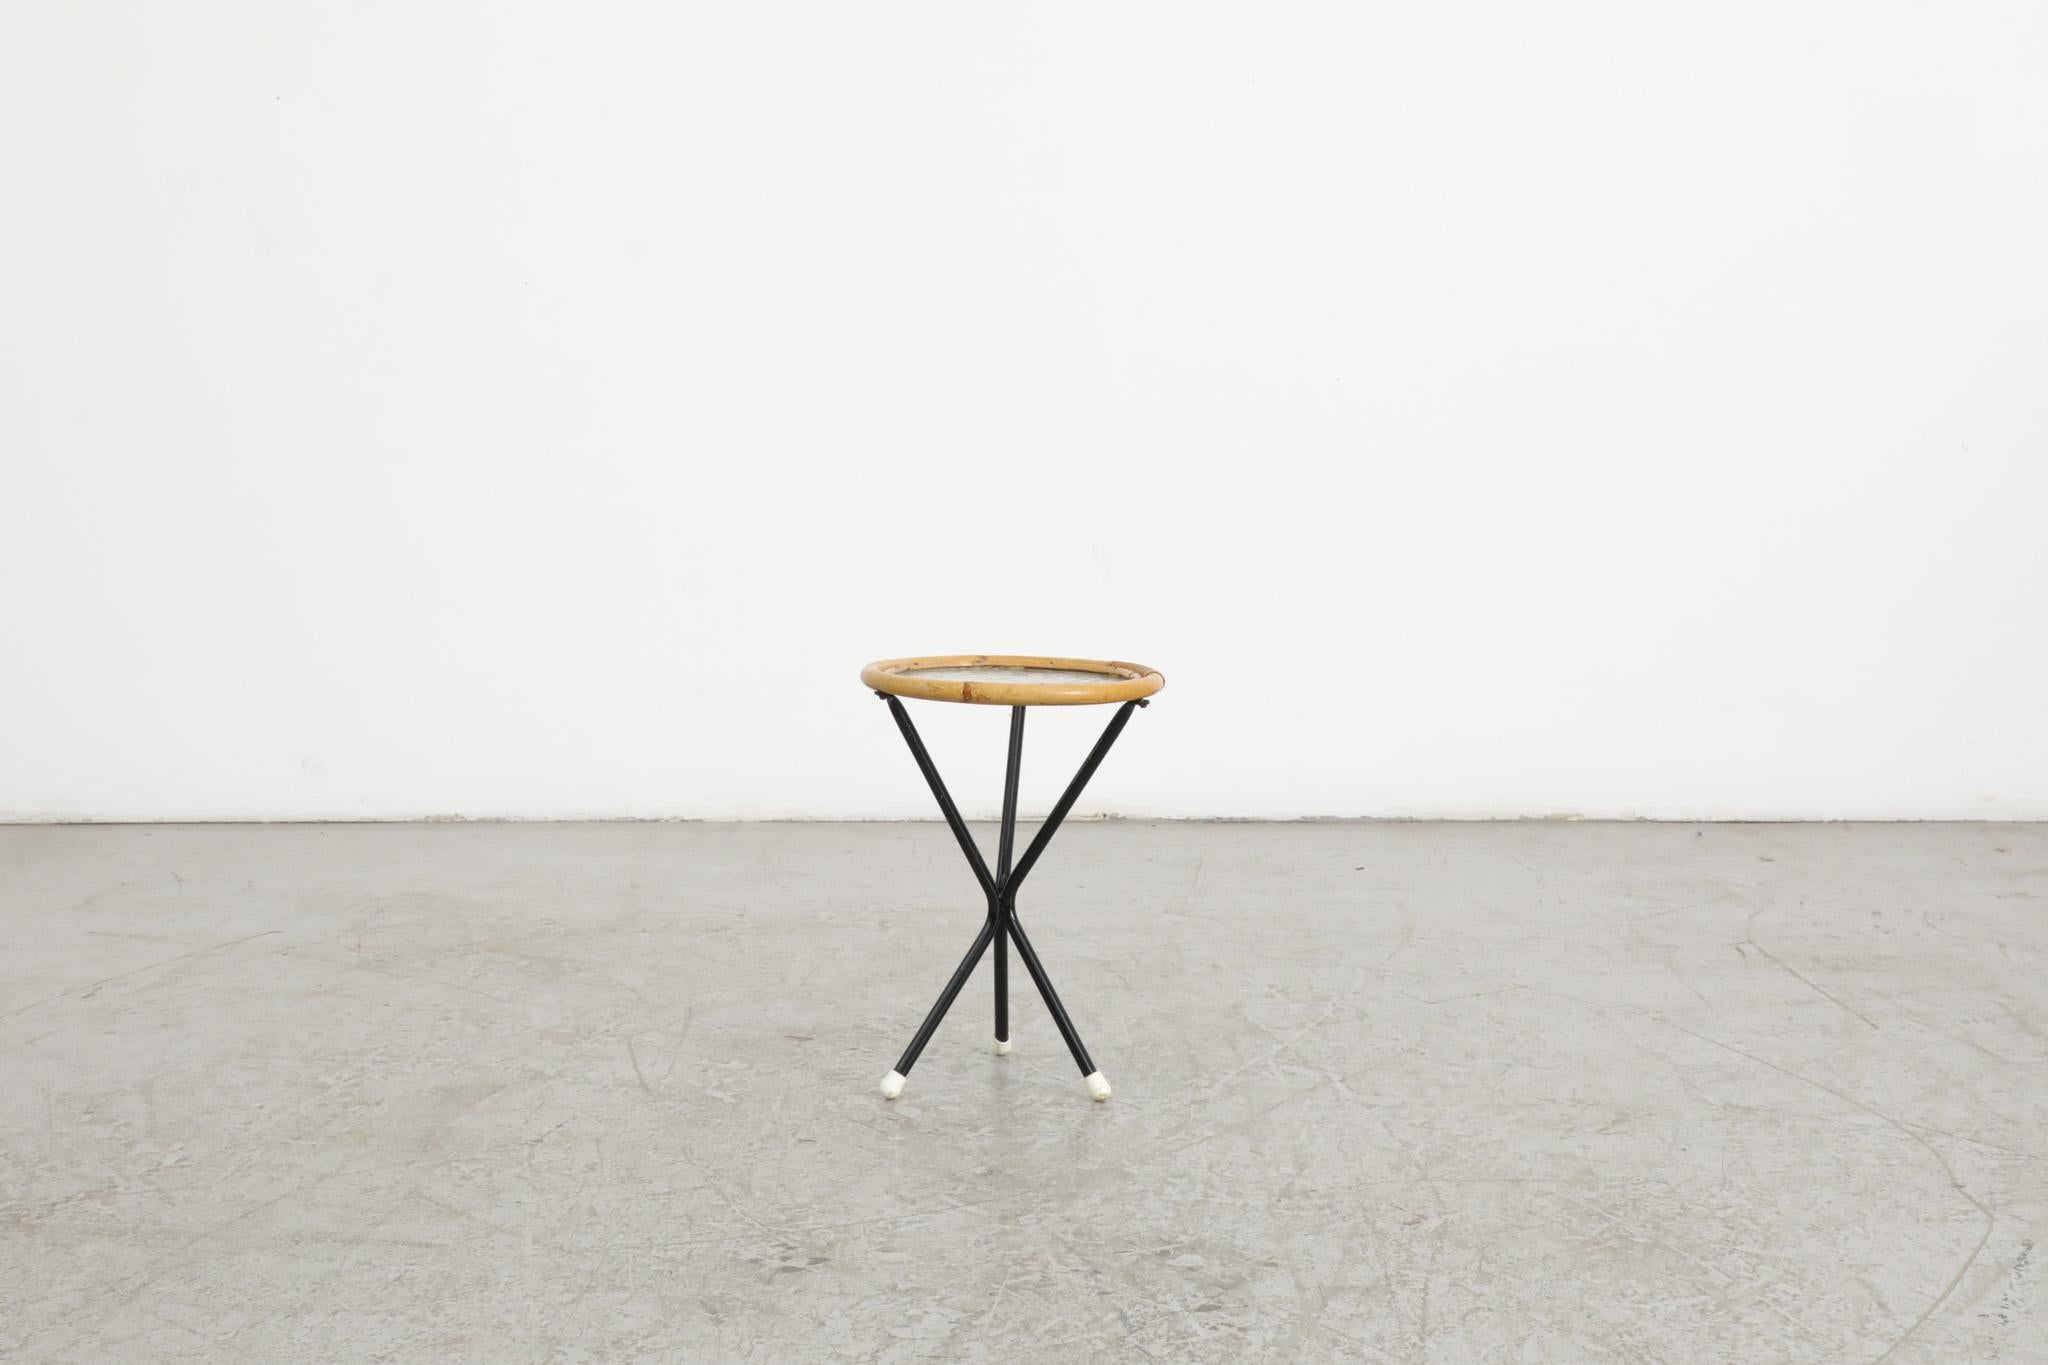 Rohe Noordwolde mini bamboo side table with textured glass and black enameled metal legs. In original condition with white plastic feet and some wear consistent with age and use. 